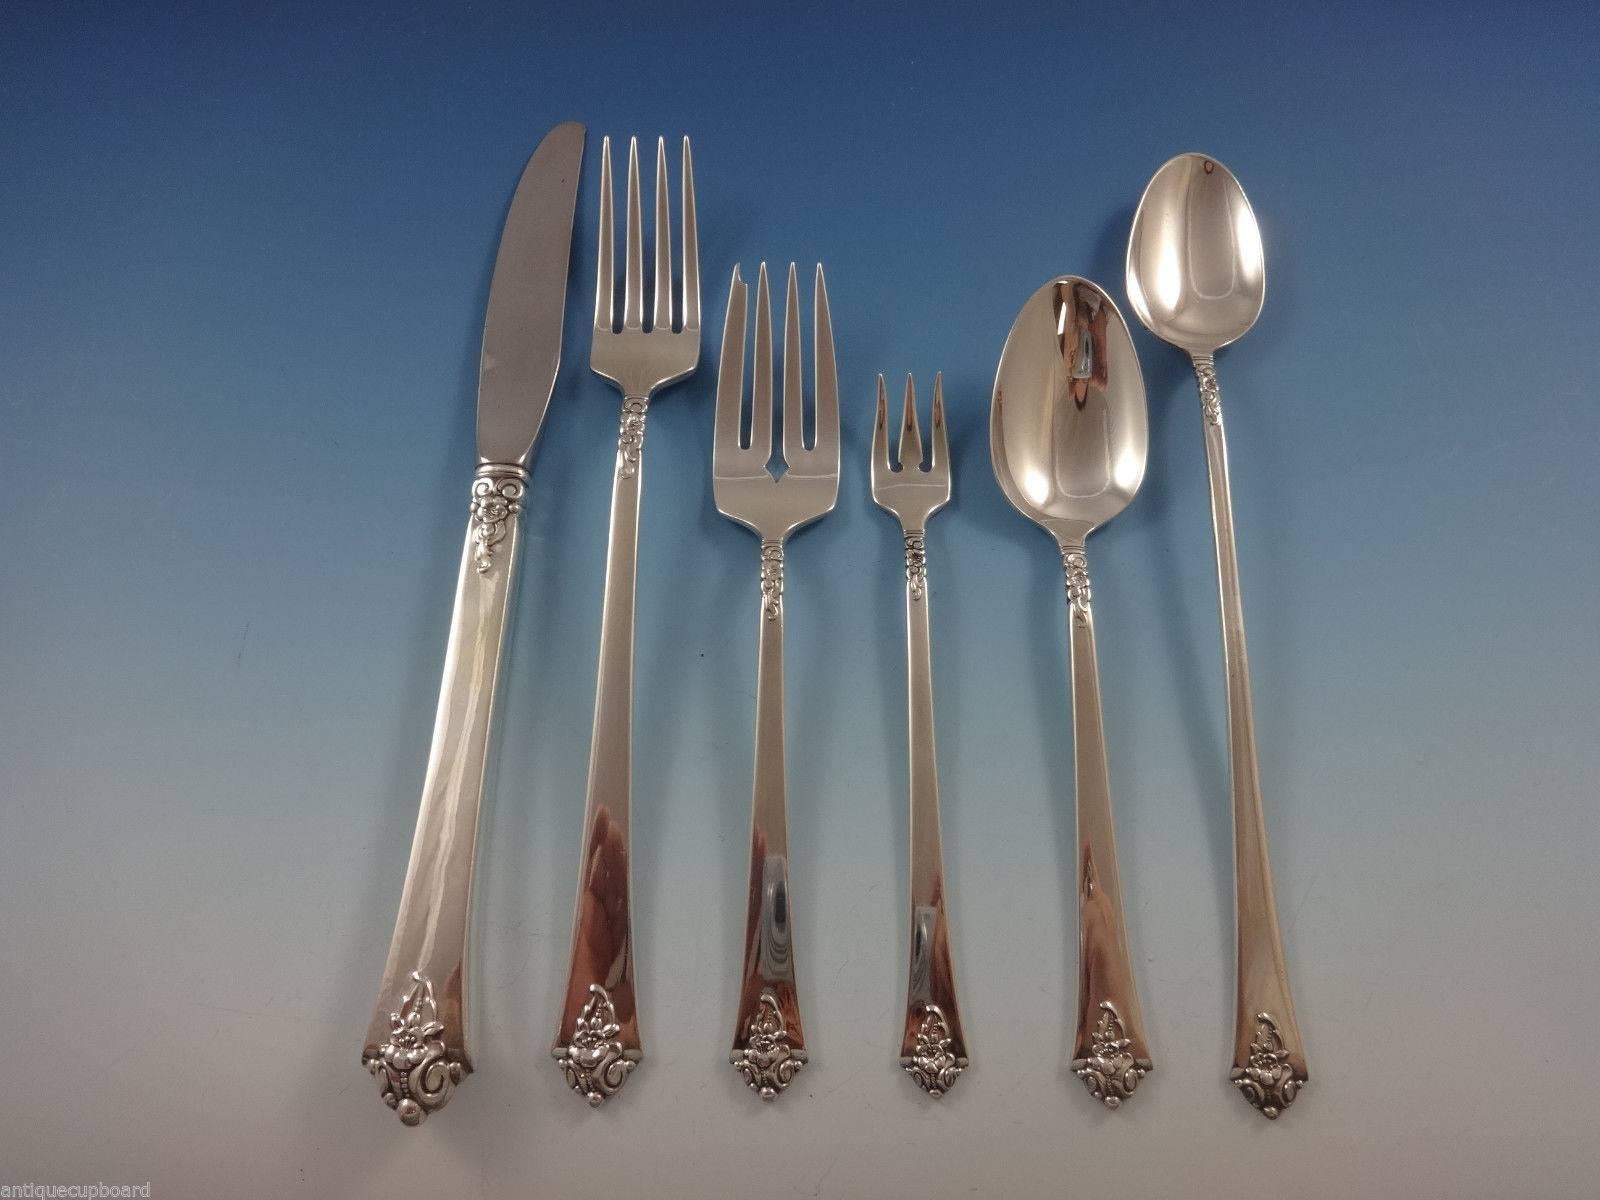 Beautiful Castle Rose by Royal Crest sterling silver flatware set, grille size (With long handles on the knife and fork), 48 pieces. This set includes:

Eight grille knives, 8 1/4